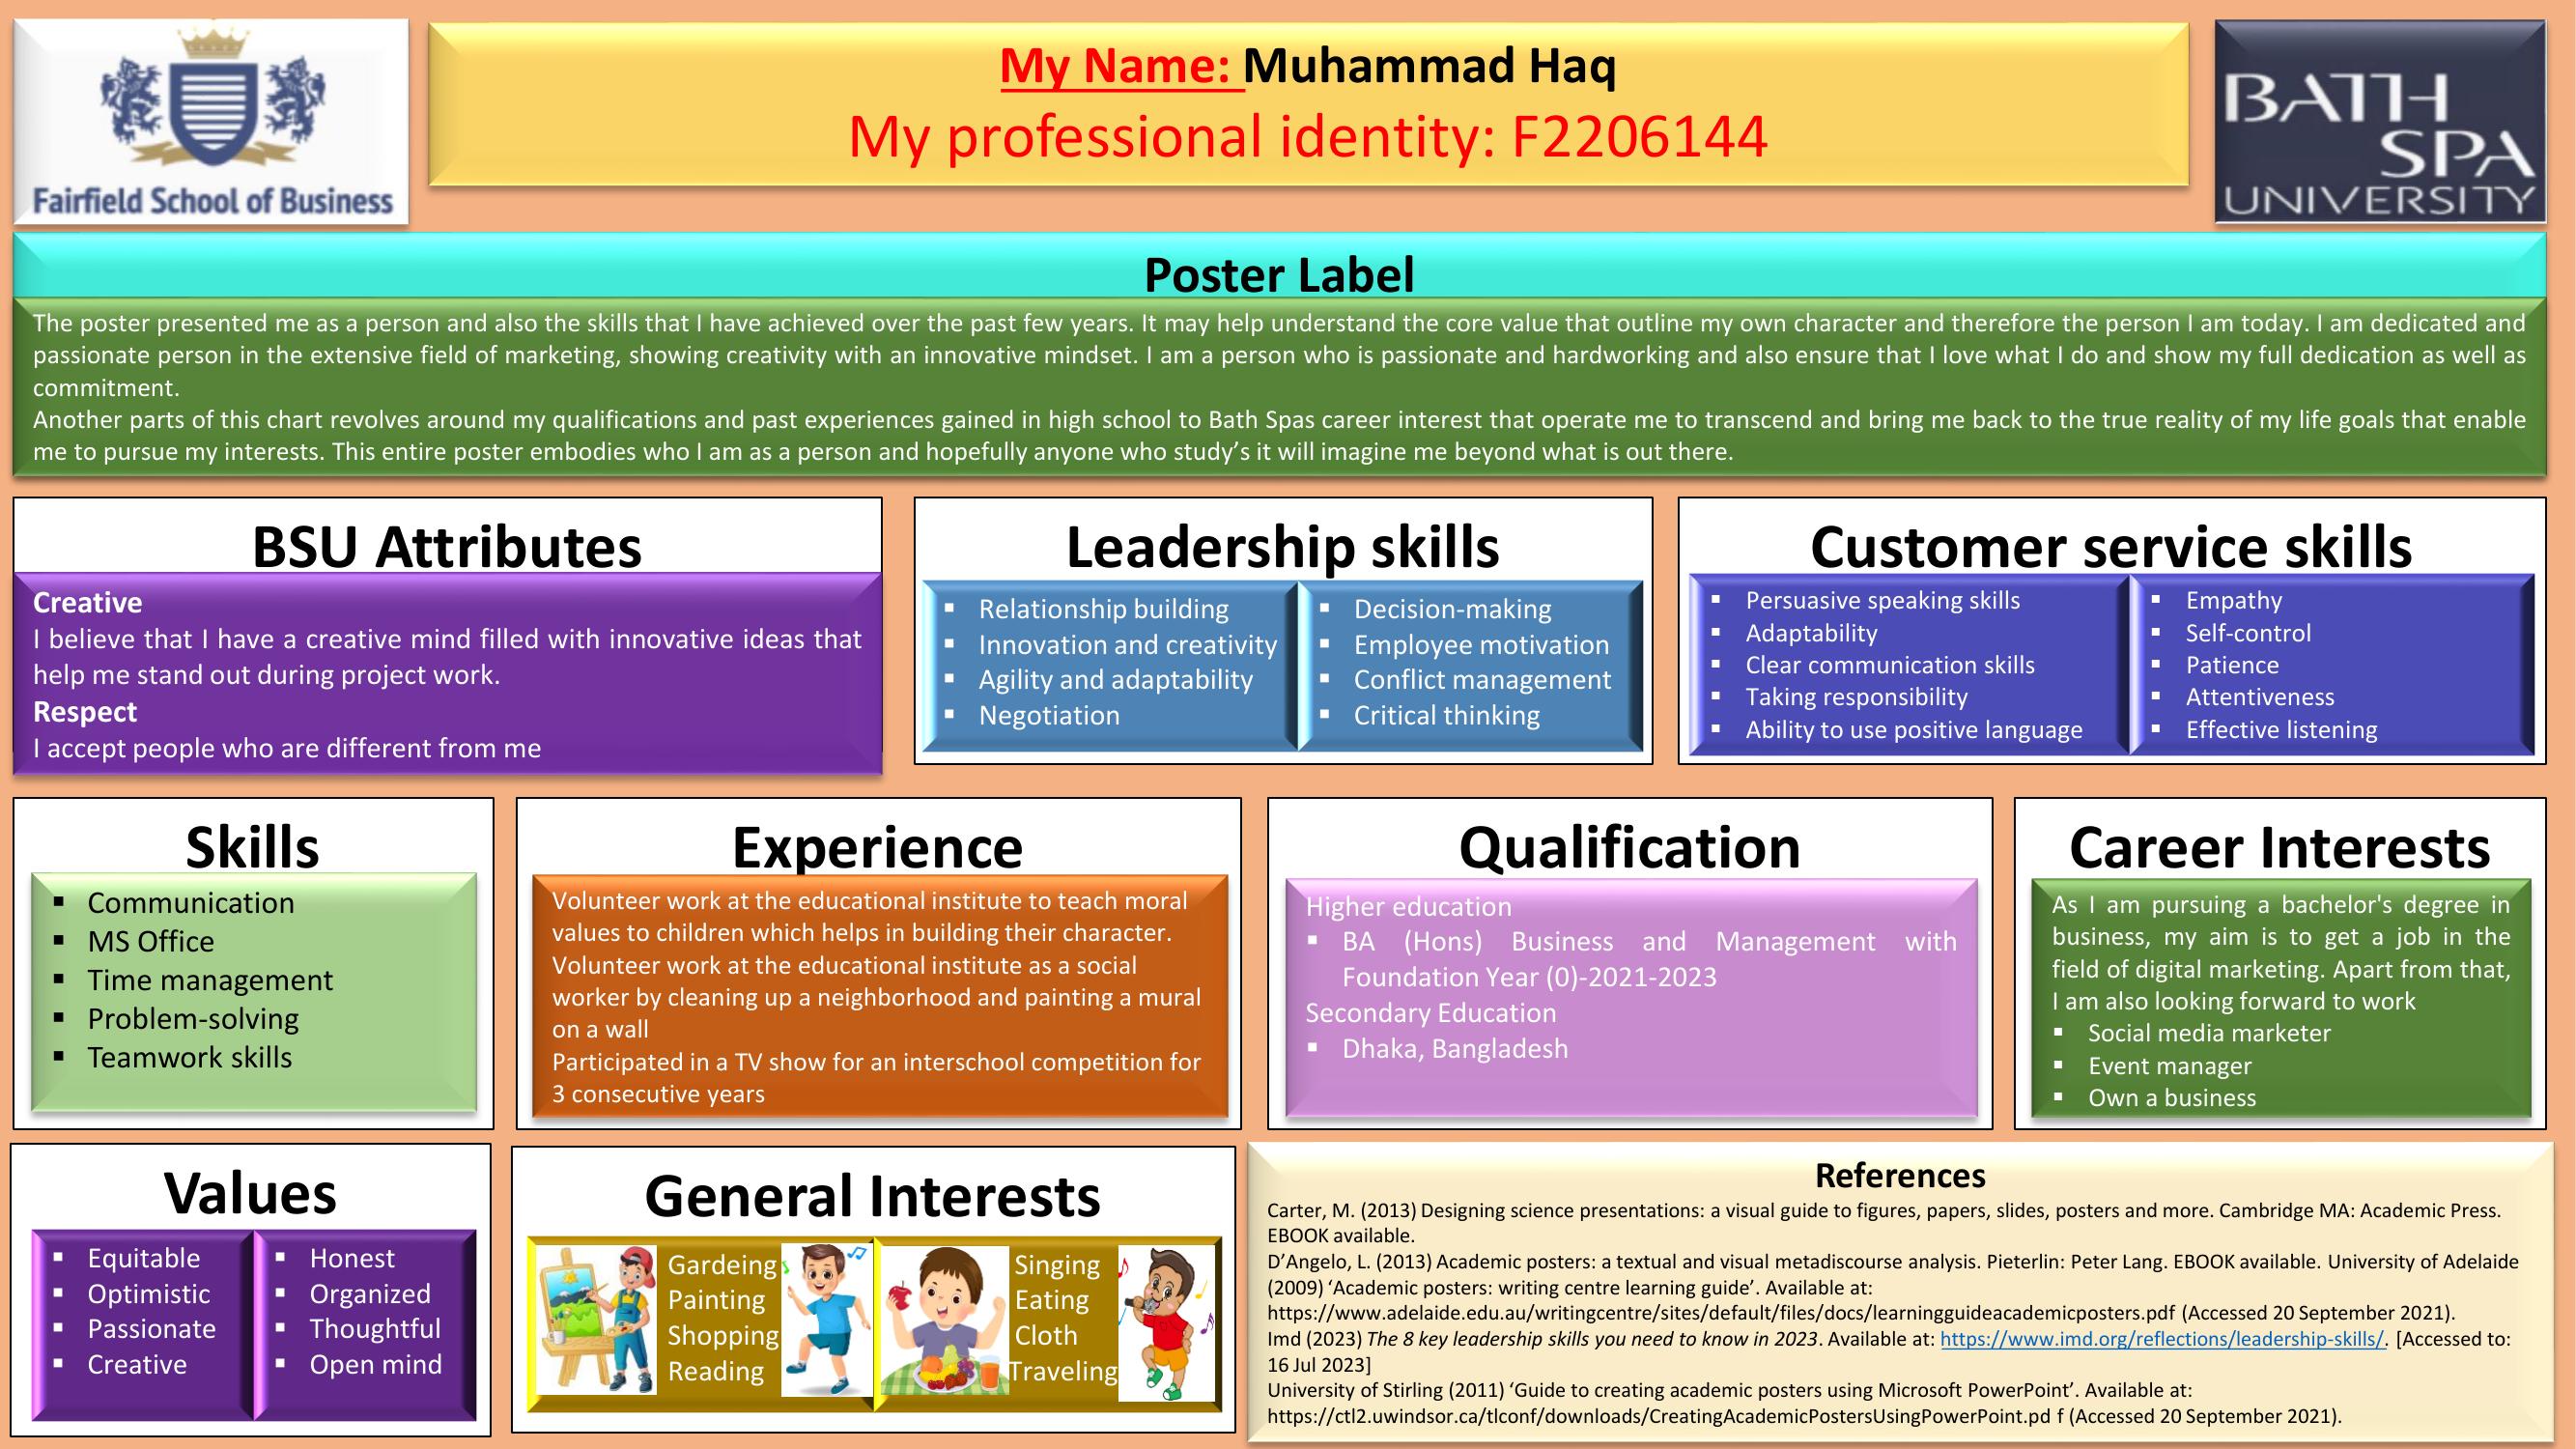 My professional identity: Poster